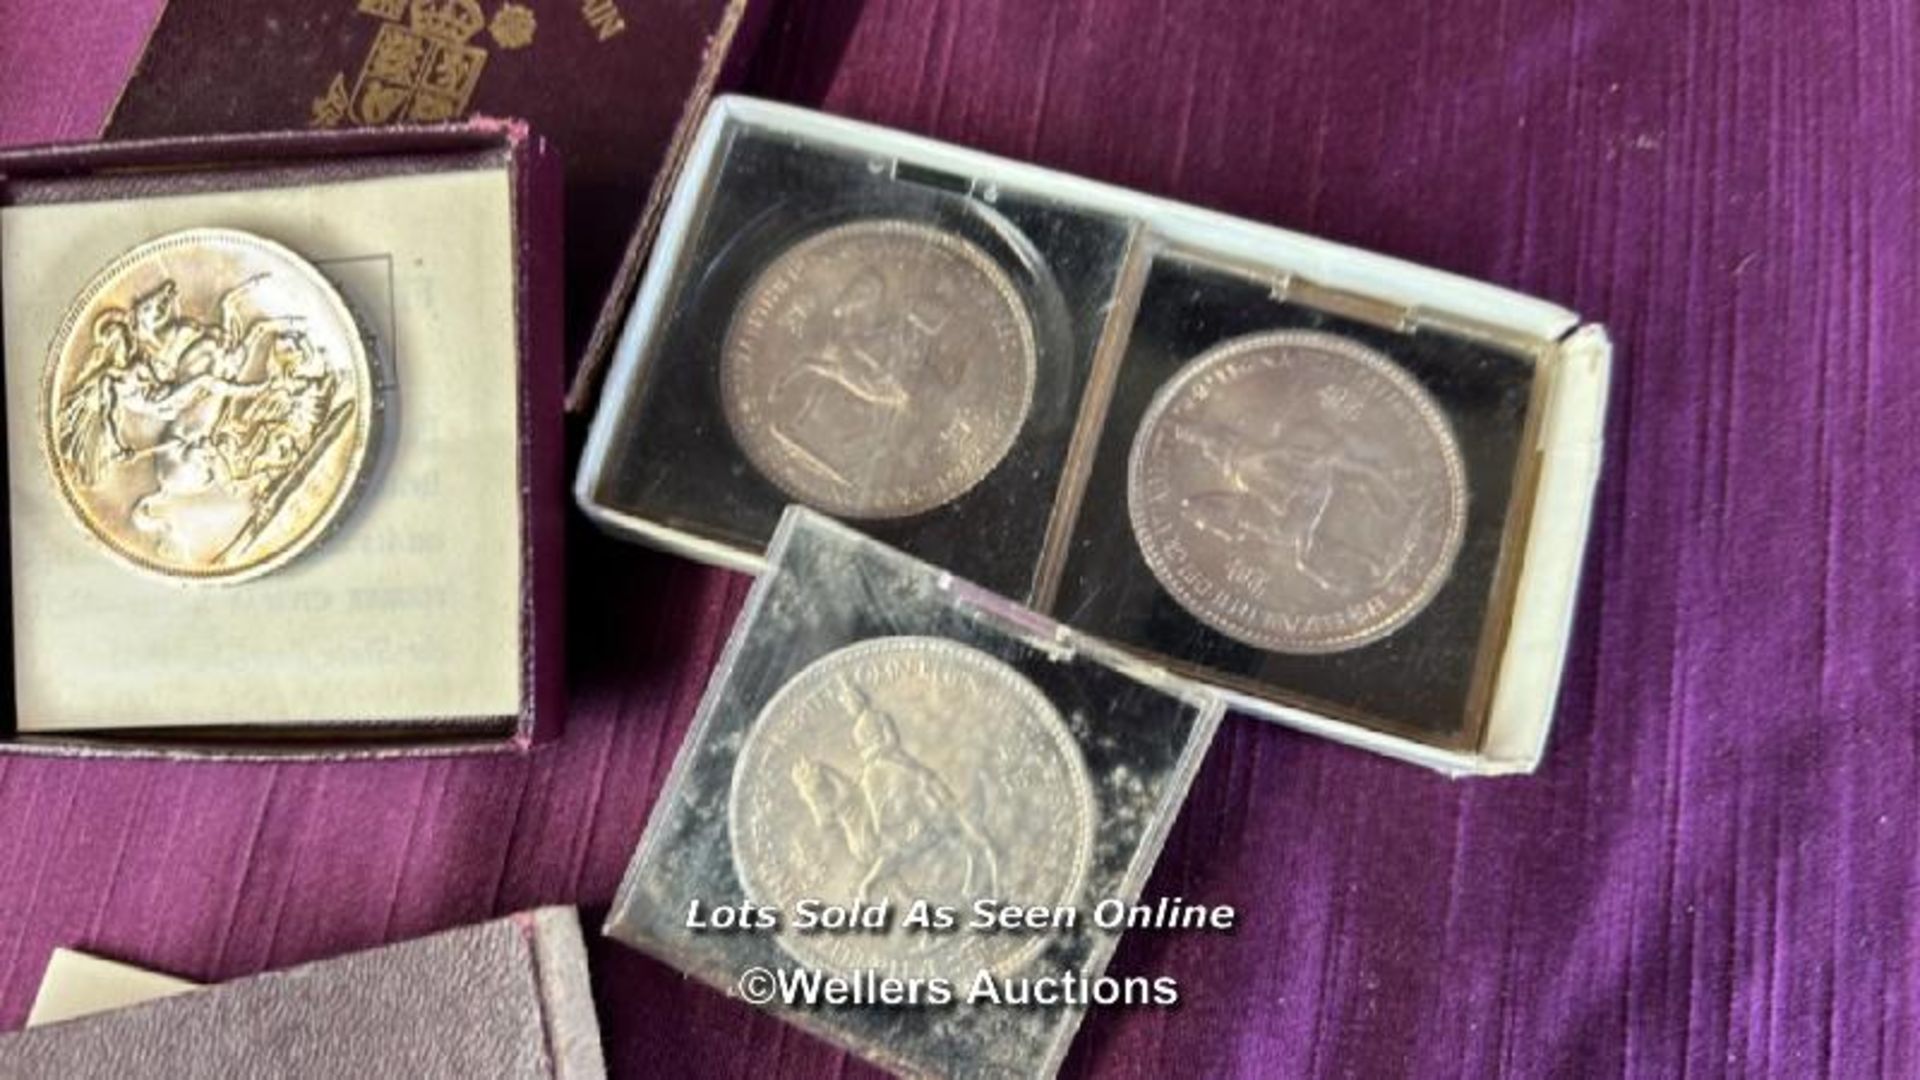 FOUR FESTIVAL OF BRITAIN 1951 COINS AND THREE QUEEN ELIZABETH FIVE SHILLING COINS - Image 4 of 4